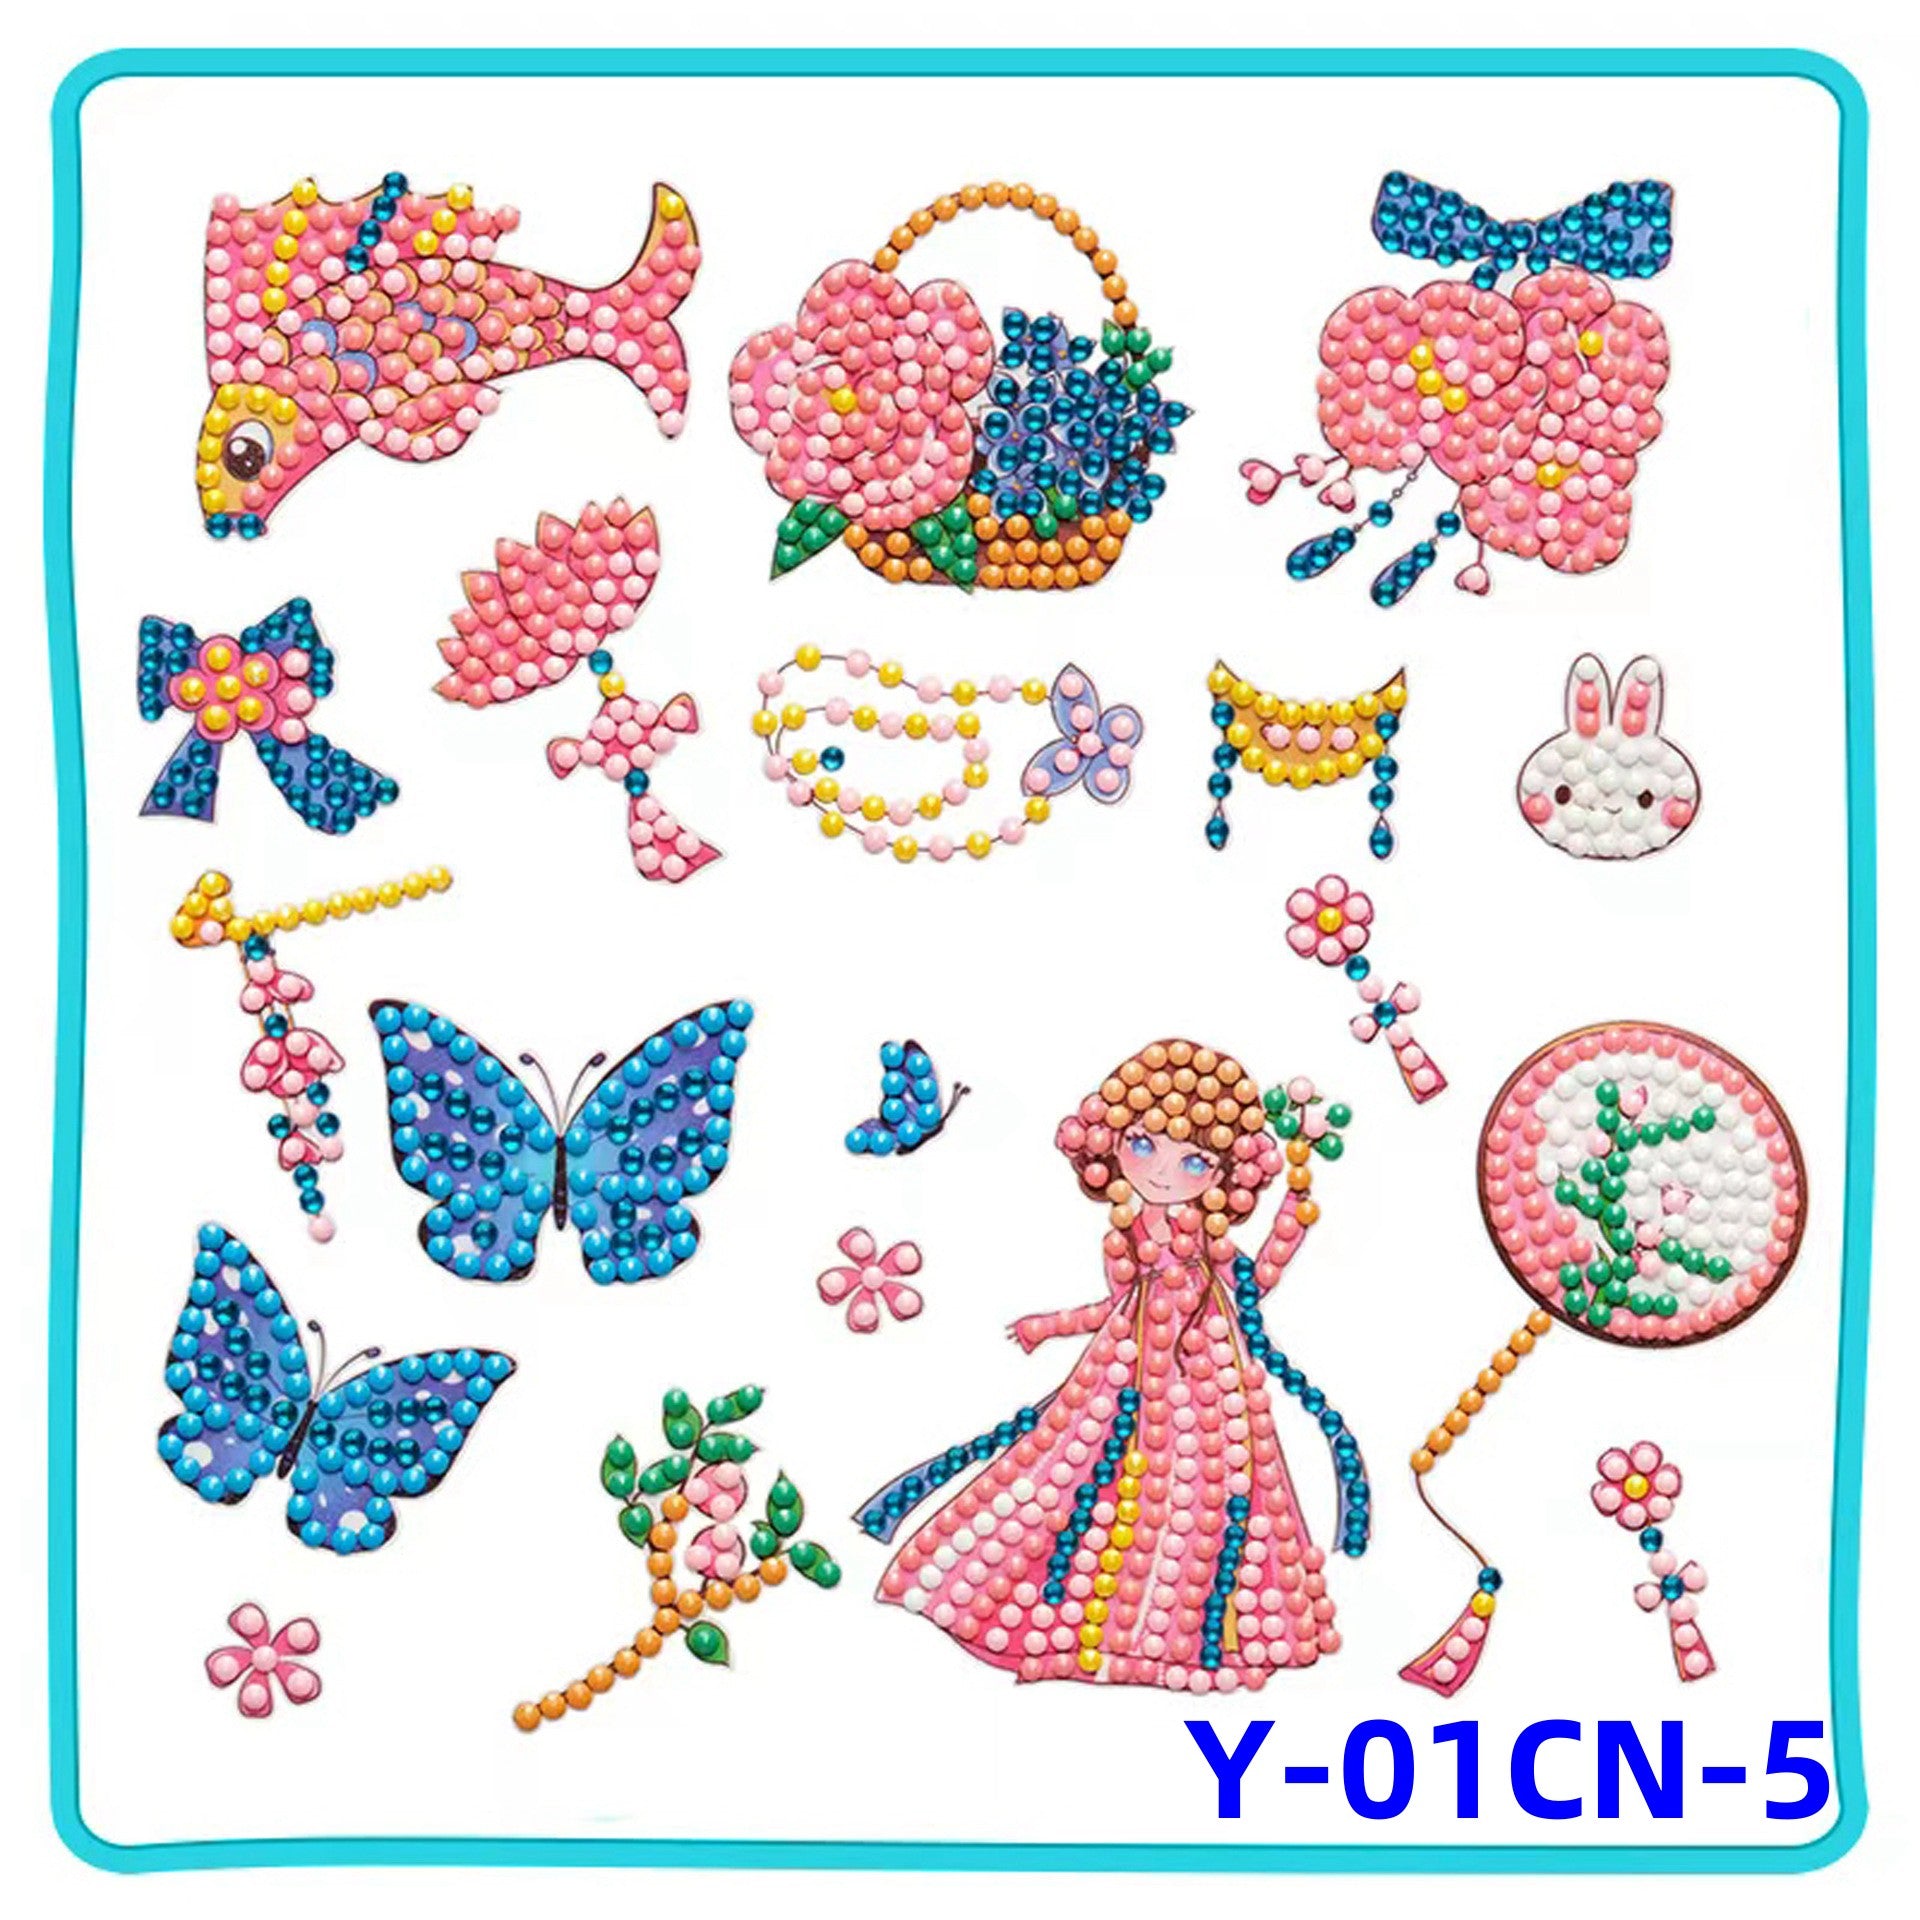 YOBEYI 5D Diamond Painting Kits for Kids Wooden Frame Diamond Arts and Crafts for Kids Mosaic Gem Stickers by Number Kits DIY Painting Arts Crafts